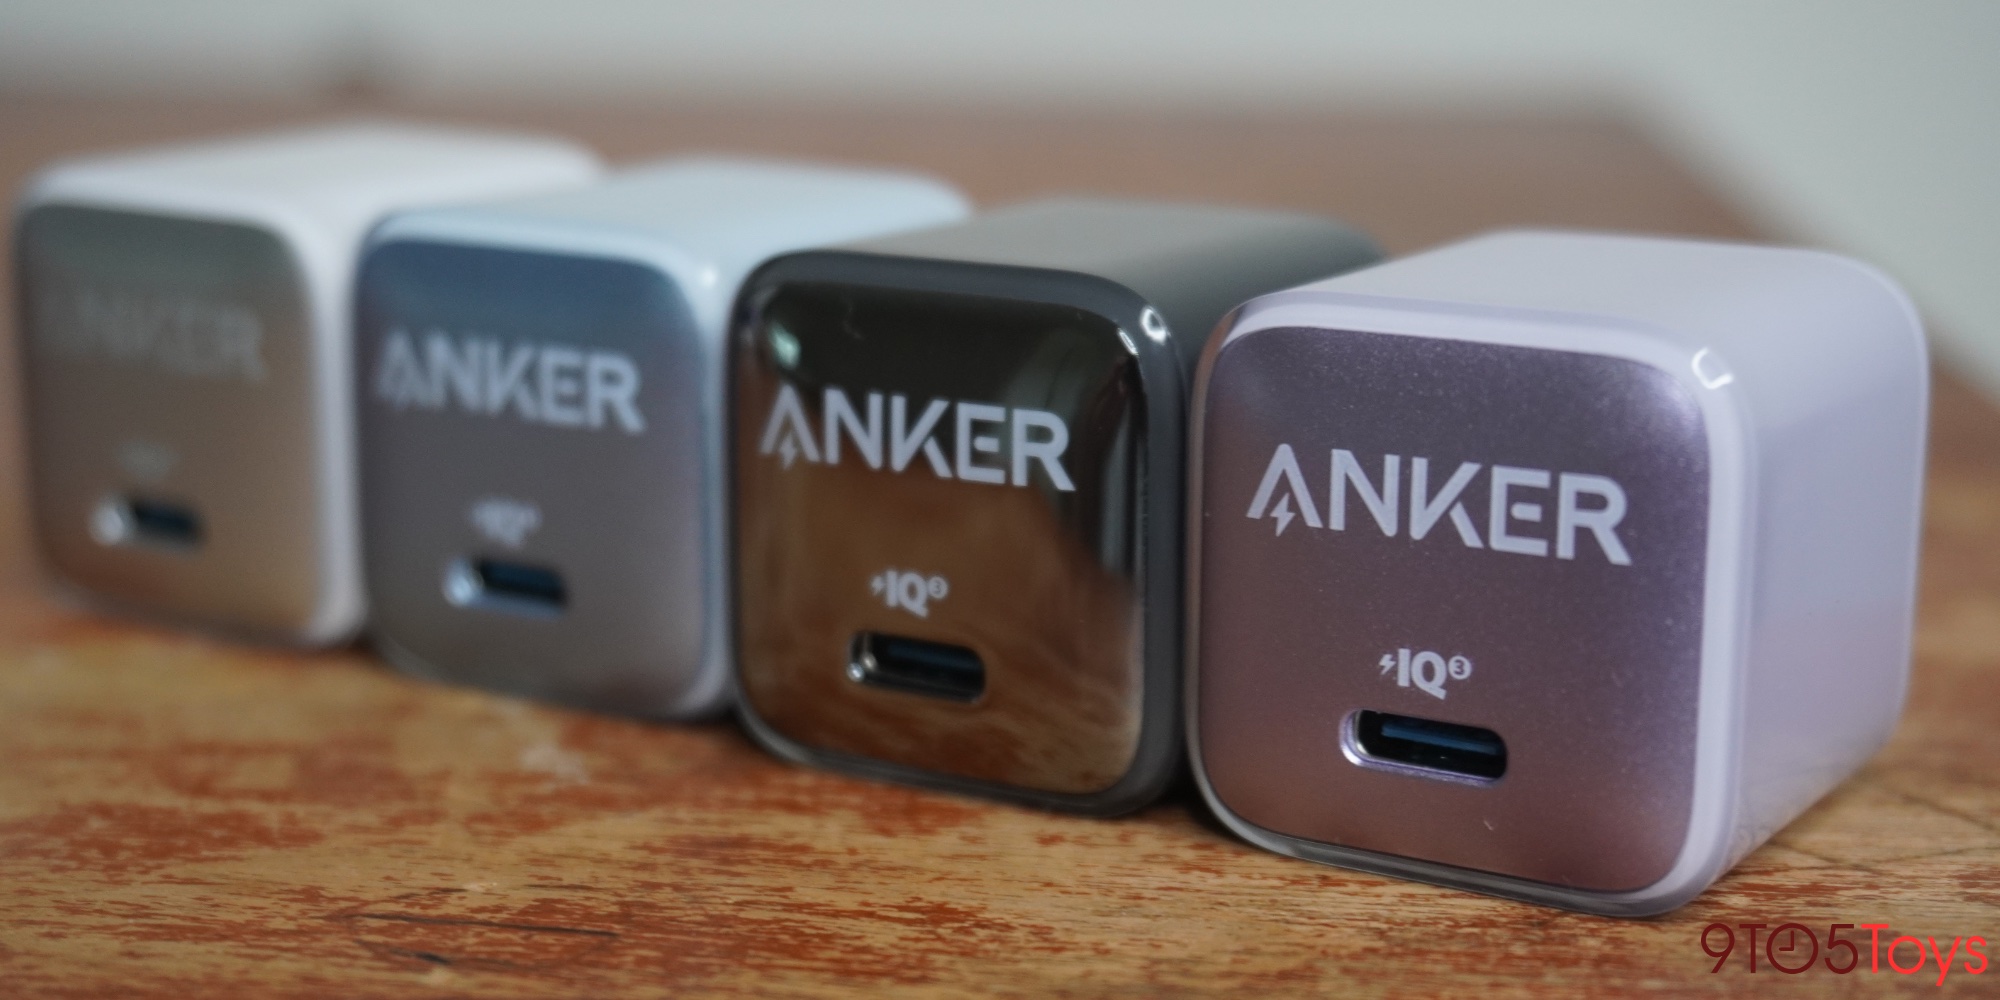 Anker Nano Pro 20W USB-C chargers debut in four colors - 9to5Toys